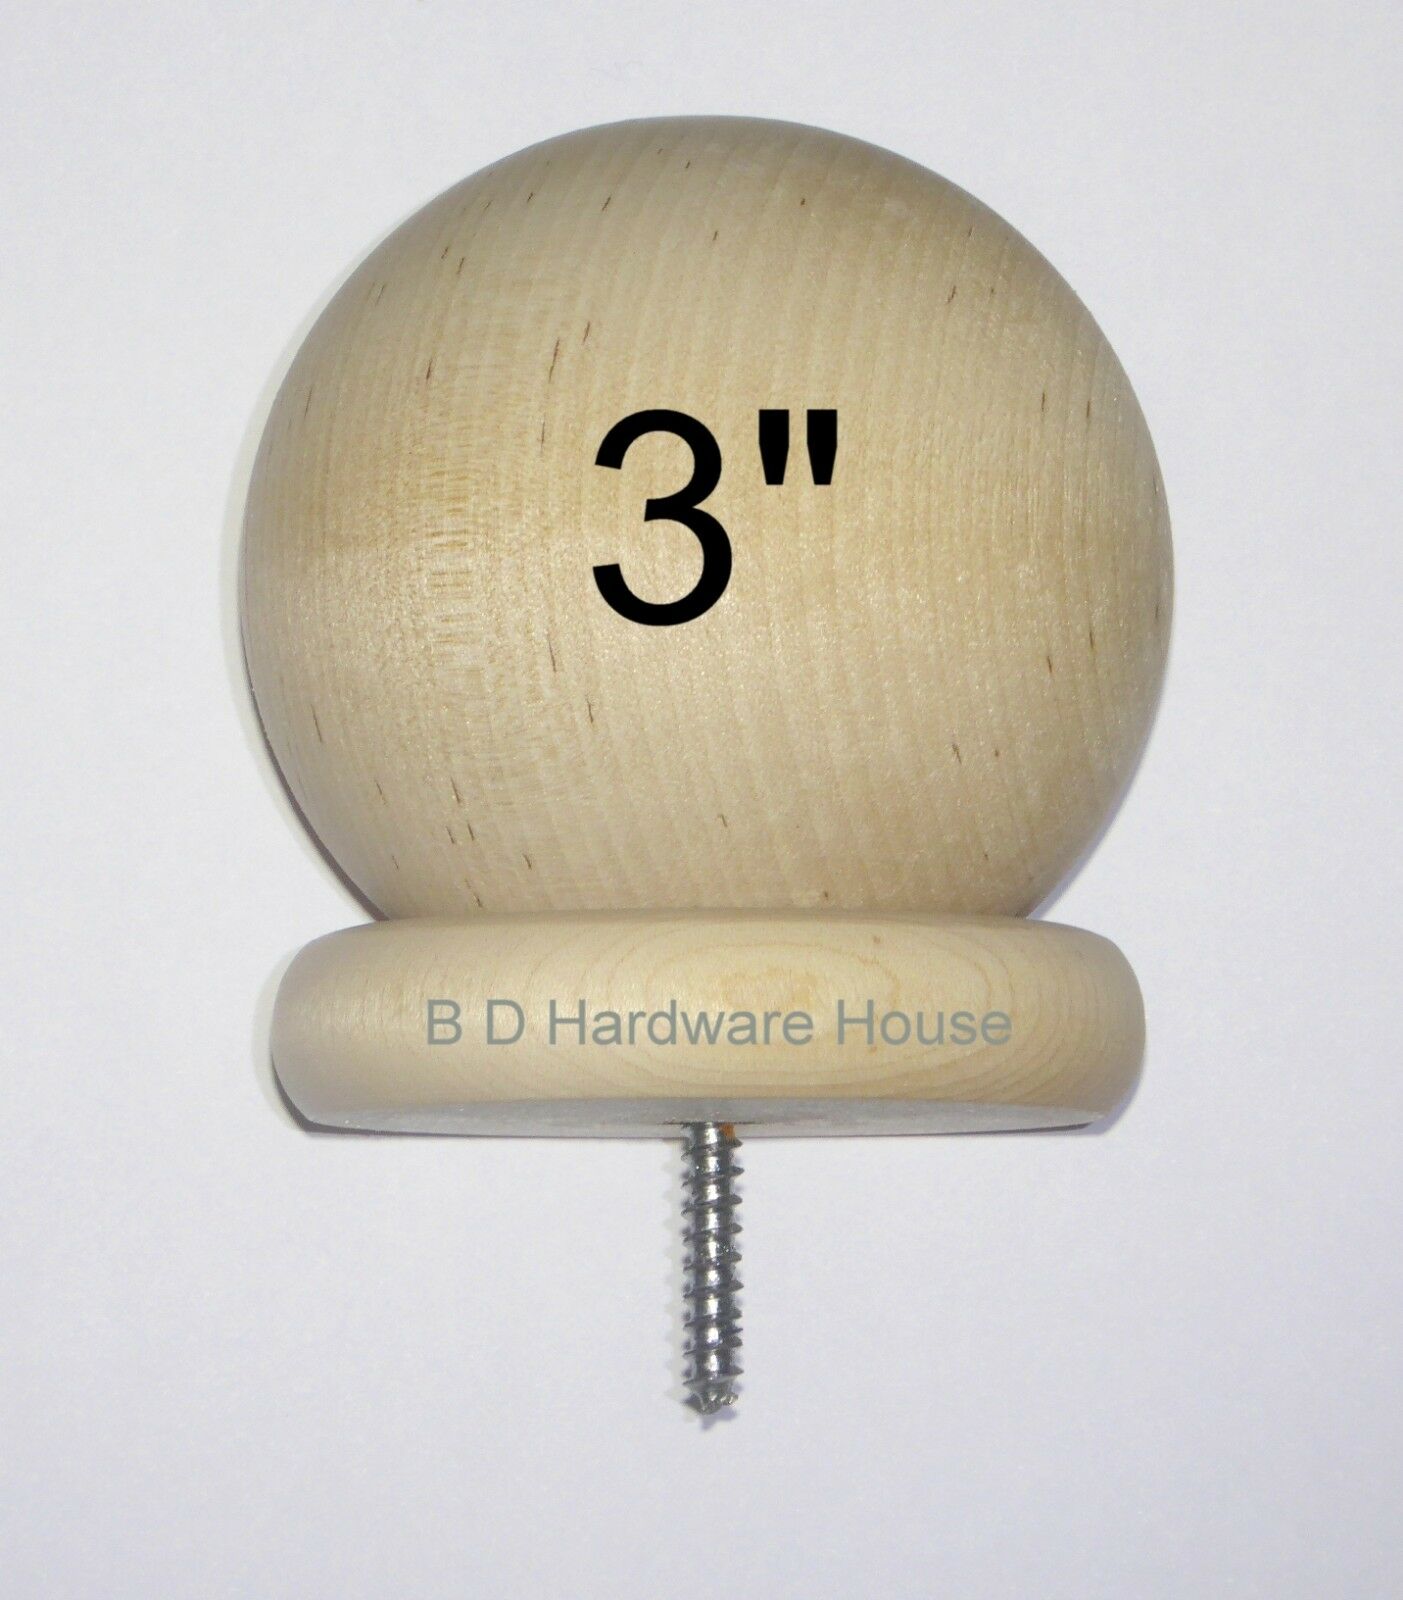 3" - Round Wood Ball Finial For Wood Newel Post Railing Cap, Curtain Rod End